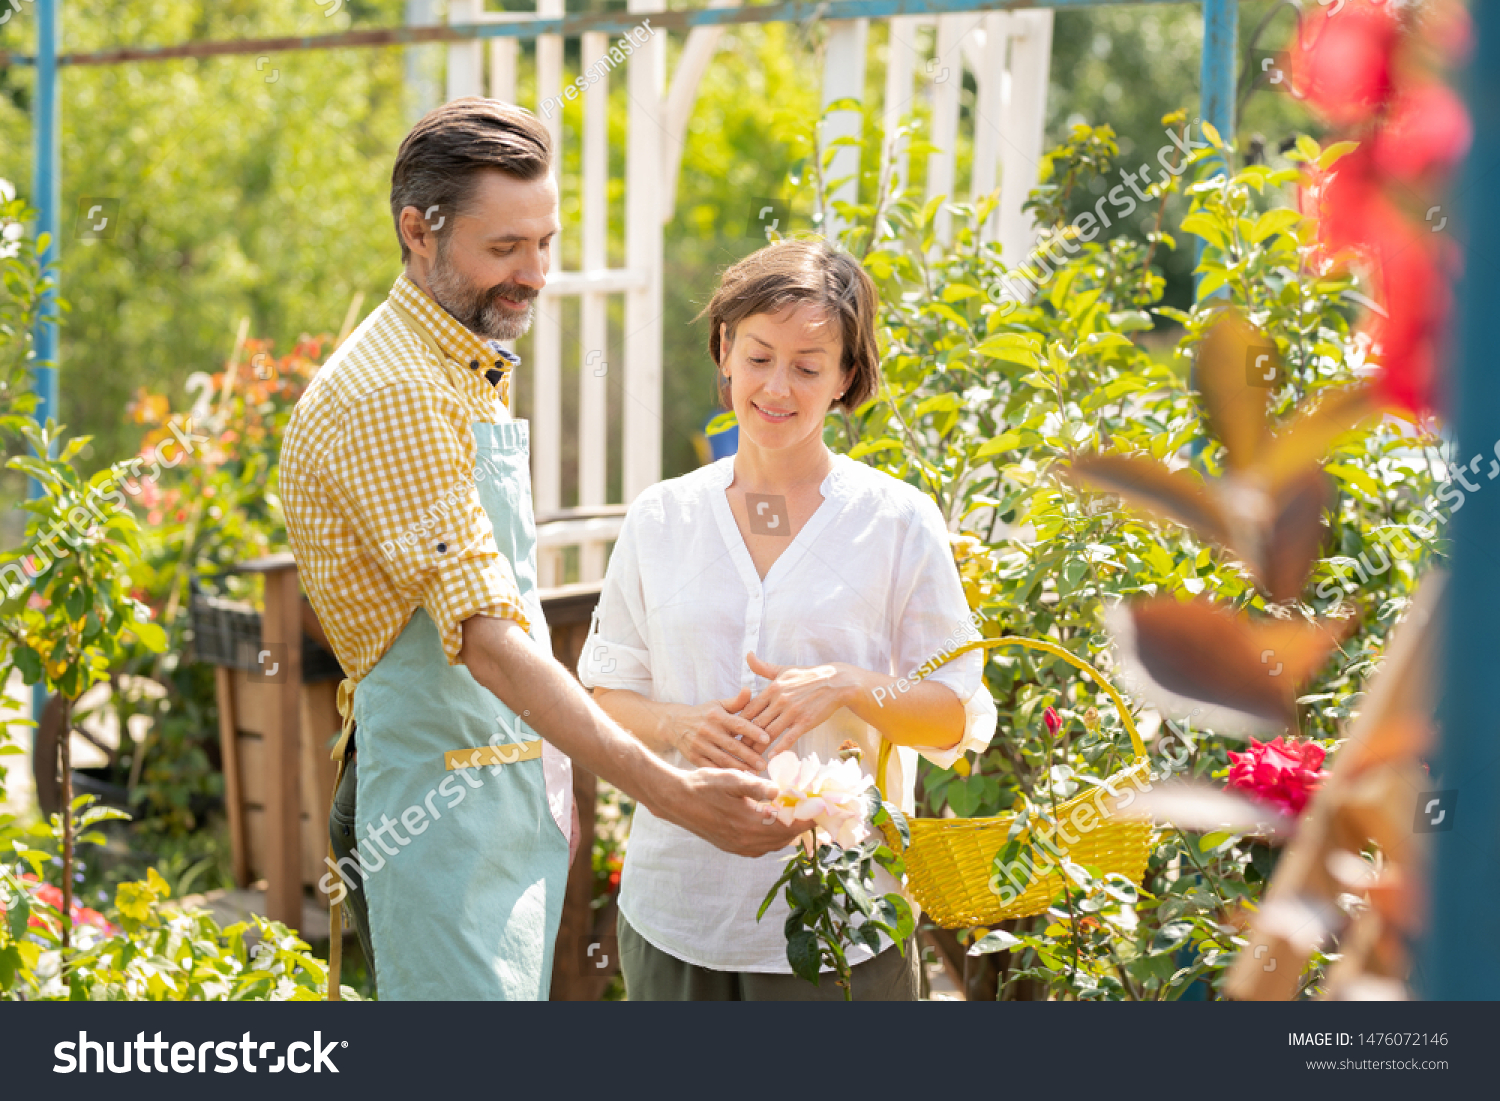 Contemporary gardener showing woman new sorts of white flowers growing in pots #1476072146